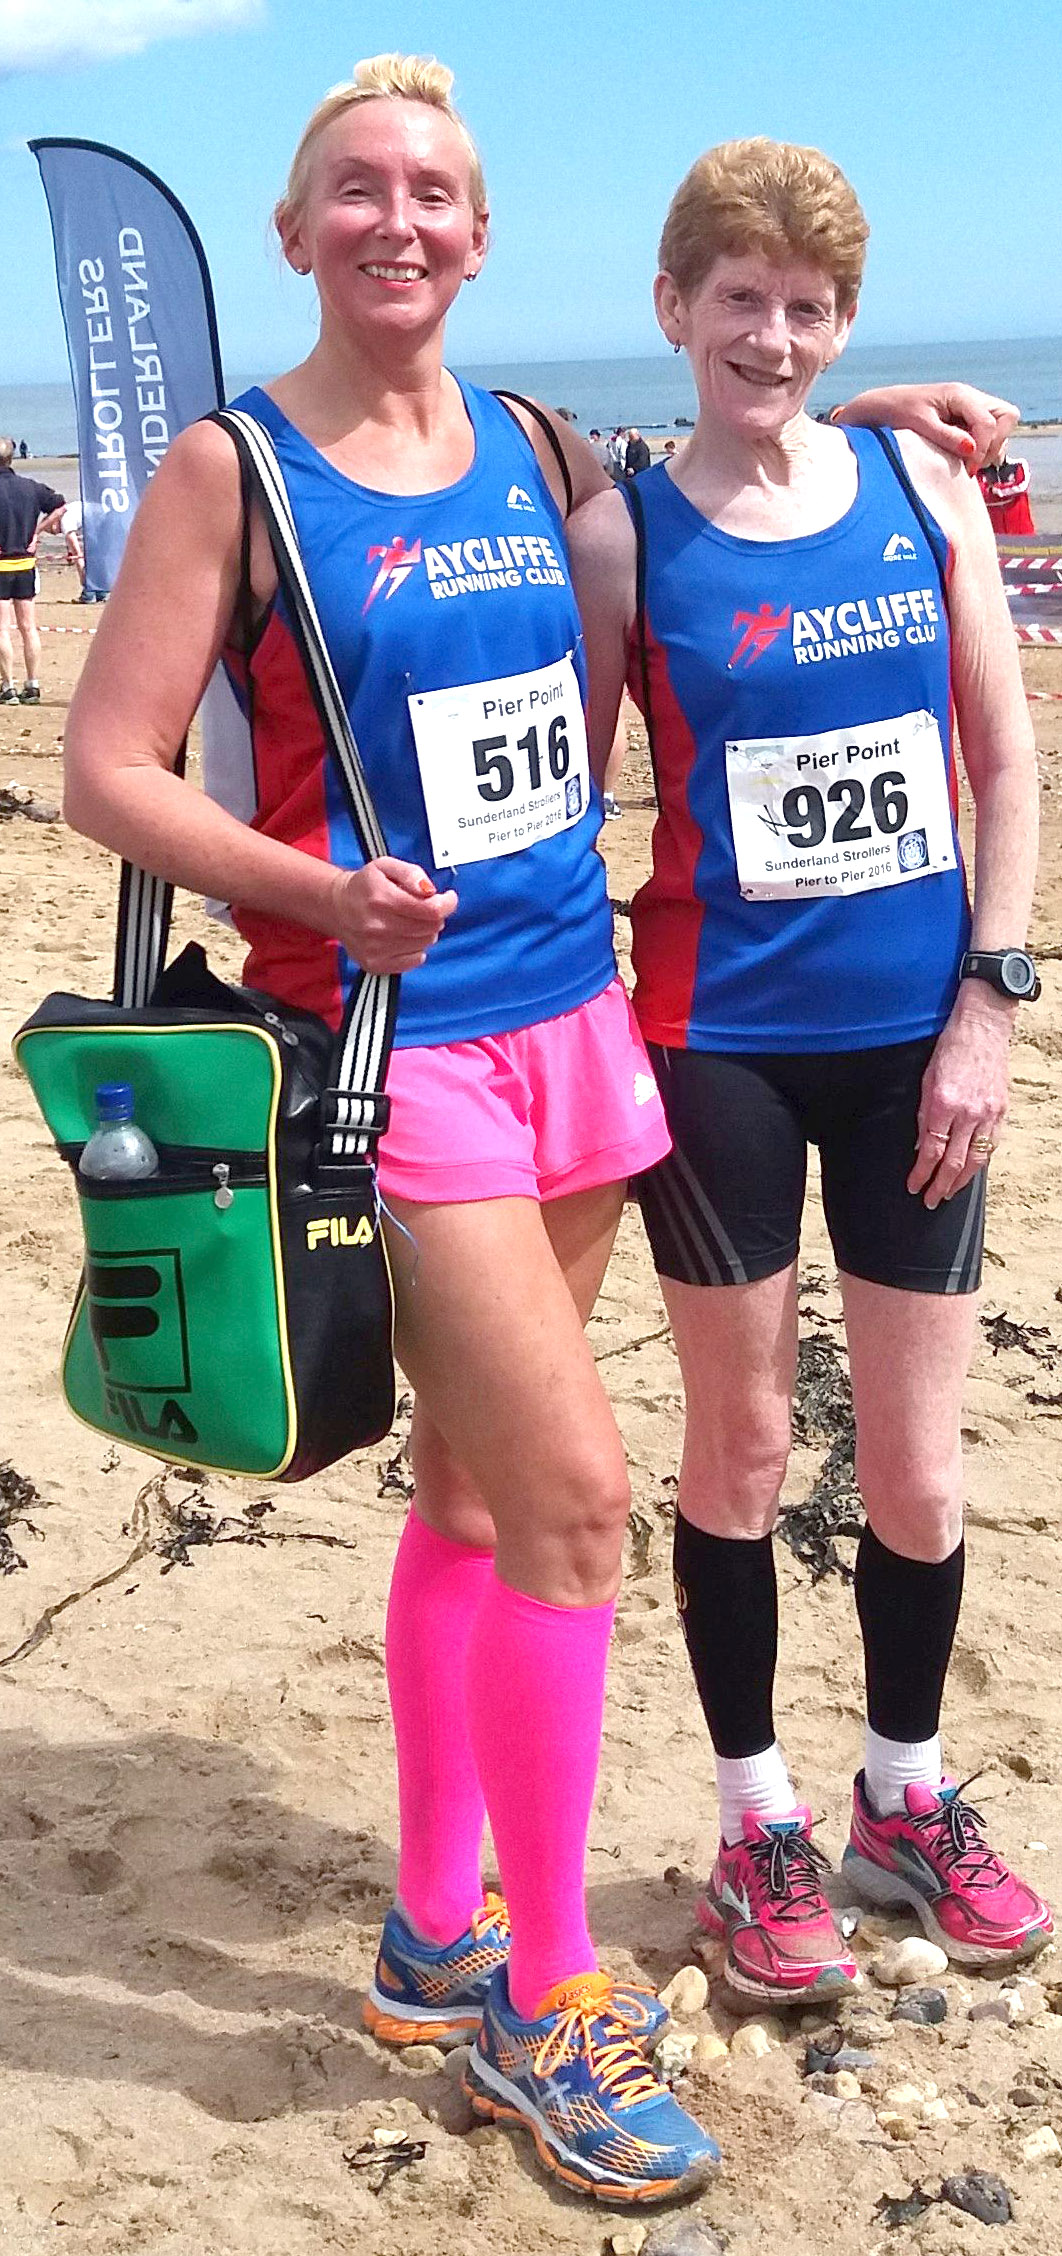 Aycliffe Runners in Lord Stones Café & Pier to Pier Races